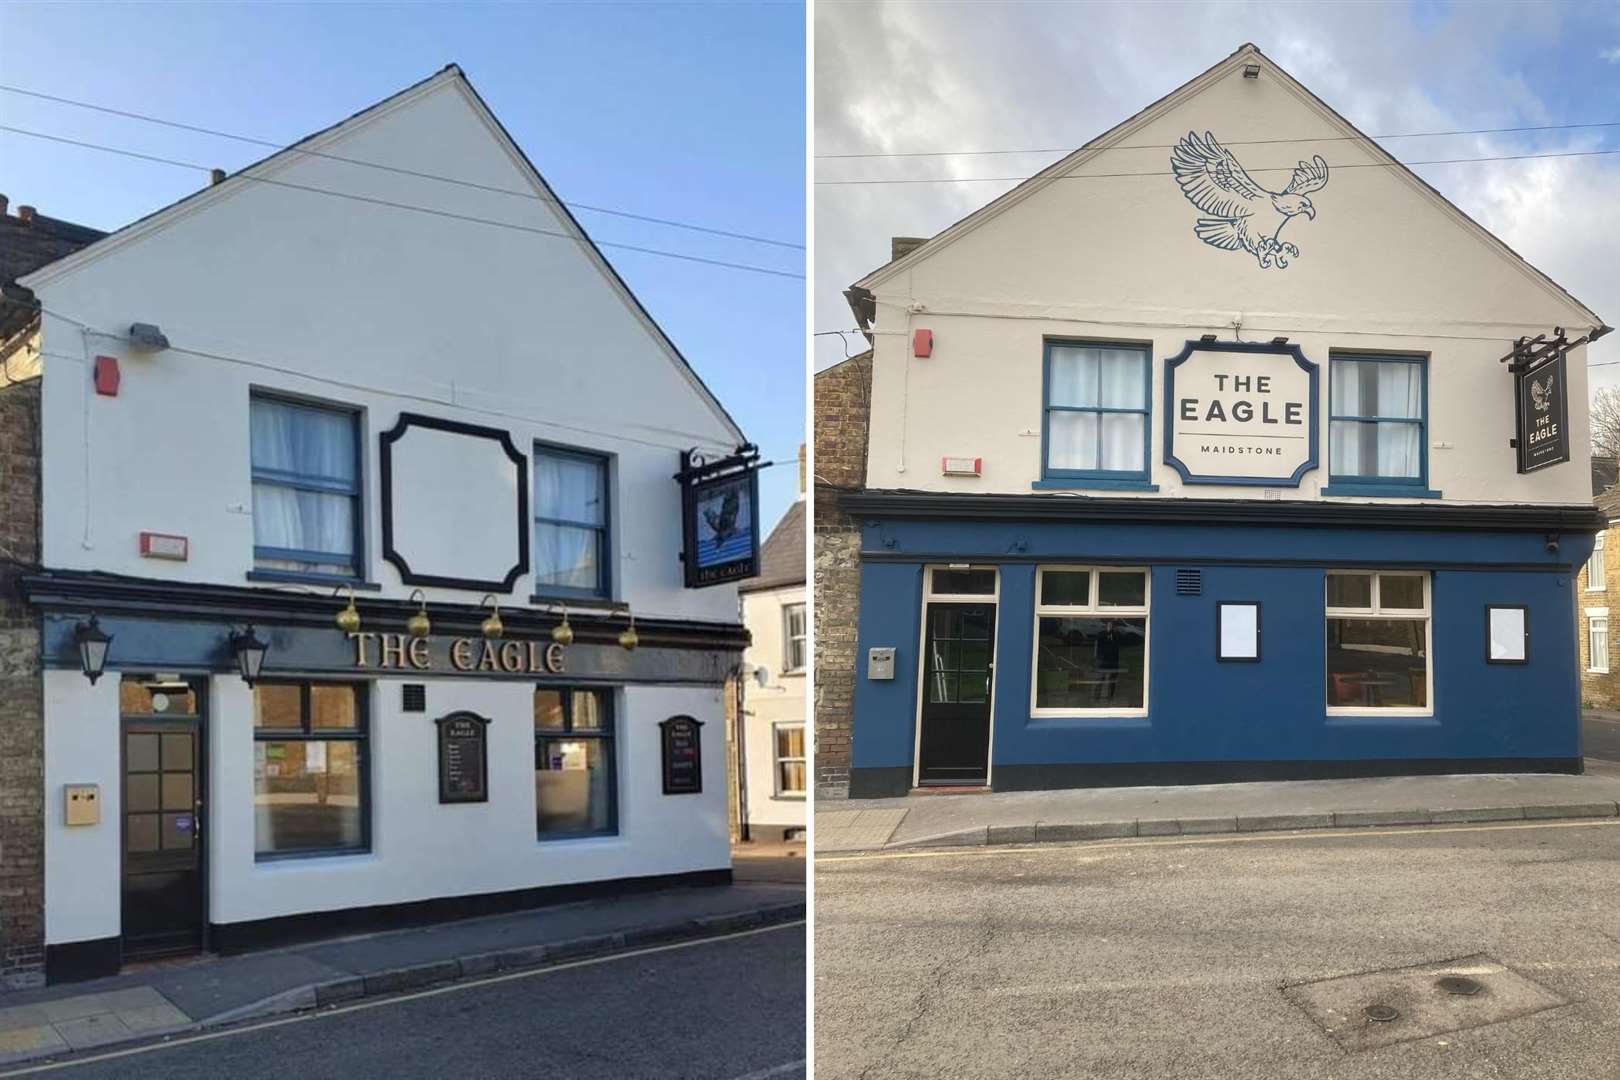 The before and after of The Eagle pub thanks to the £100k transformation